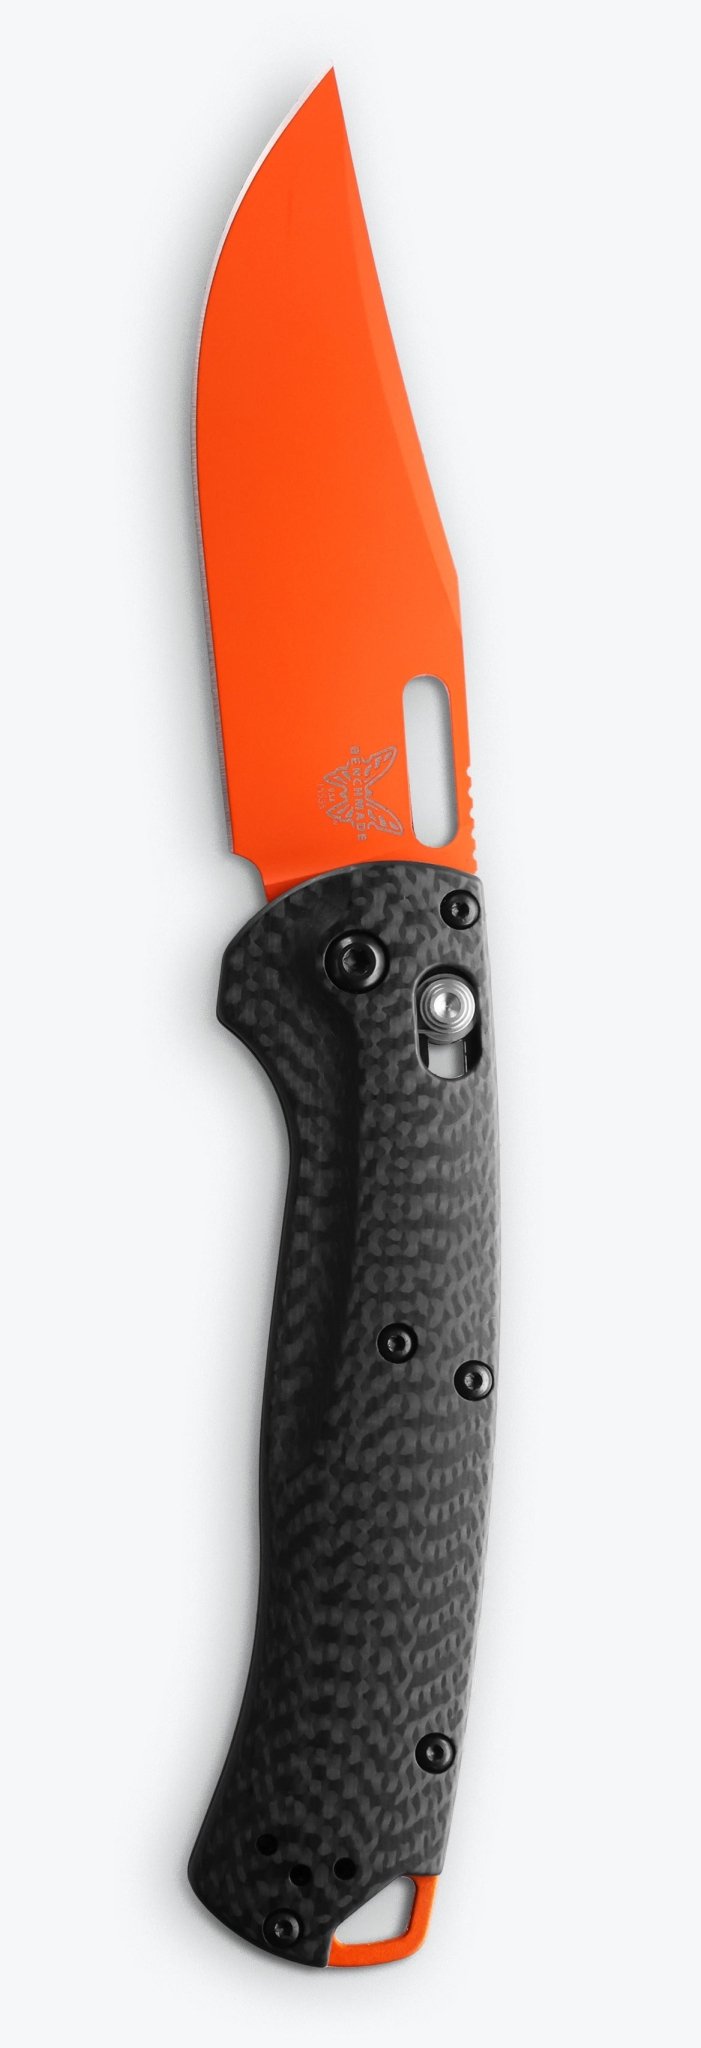 Benchmade 15535OR-01 Taggedout - Pacific Flyway Supplies